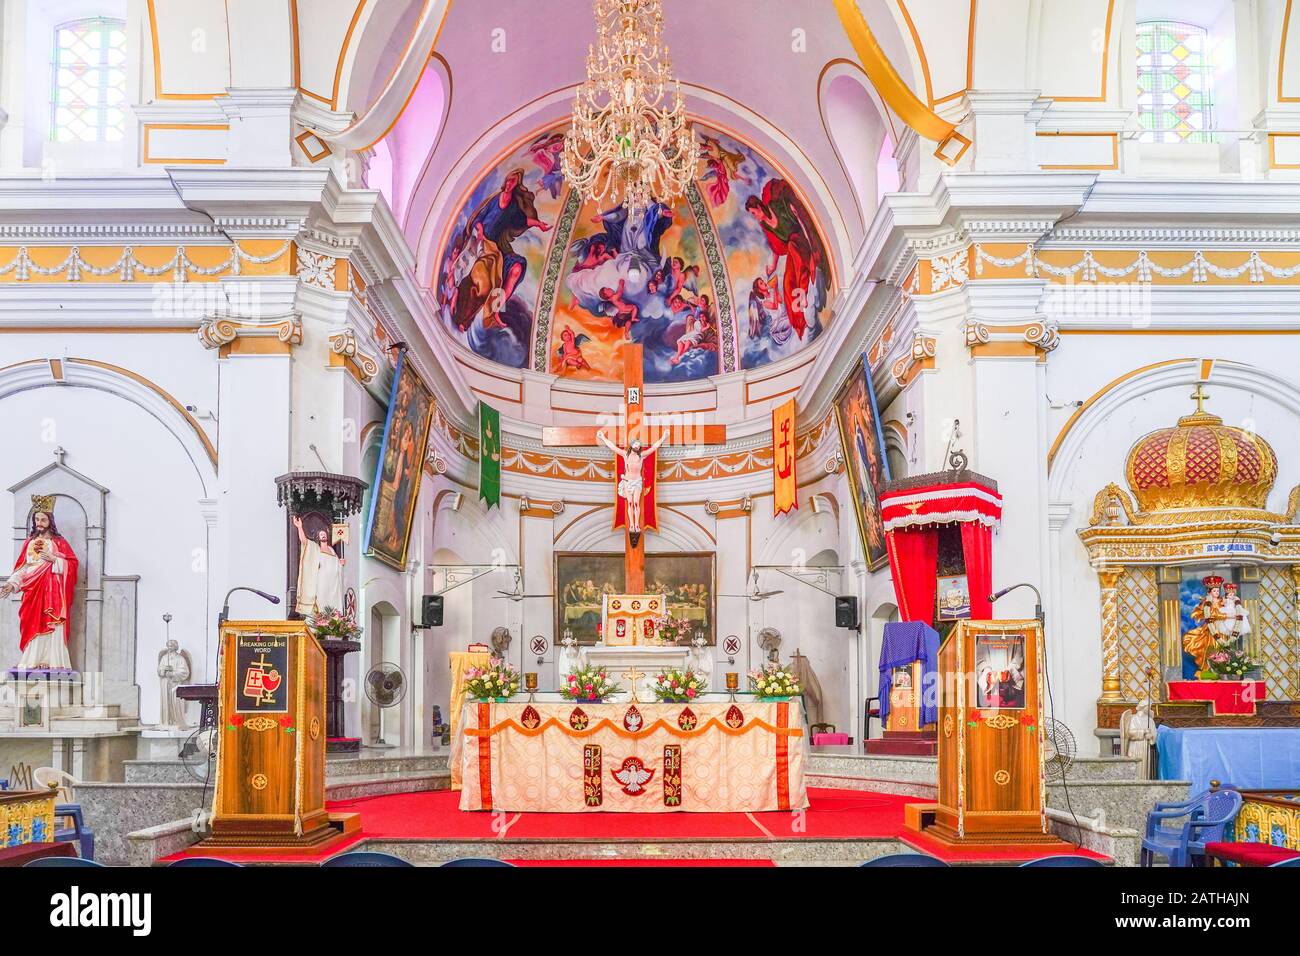 Views inside the Immaculate Conception cathedral in Pondicherry. From a series of travel photos in South India. Photo date: Wednesday, January 8, 2020 Stock Photo